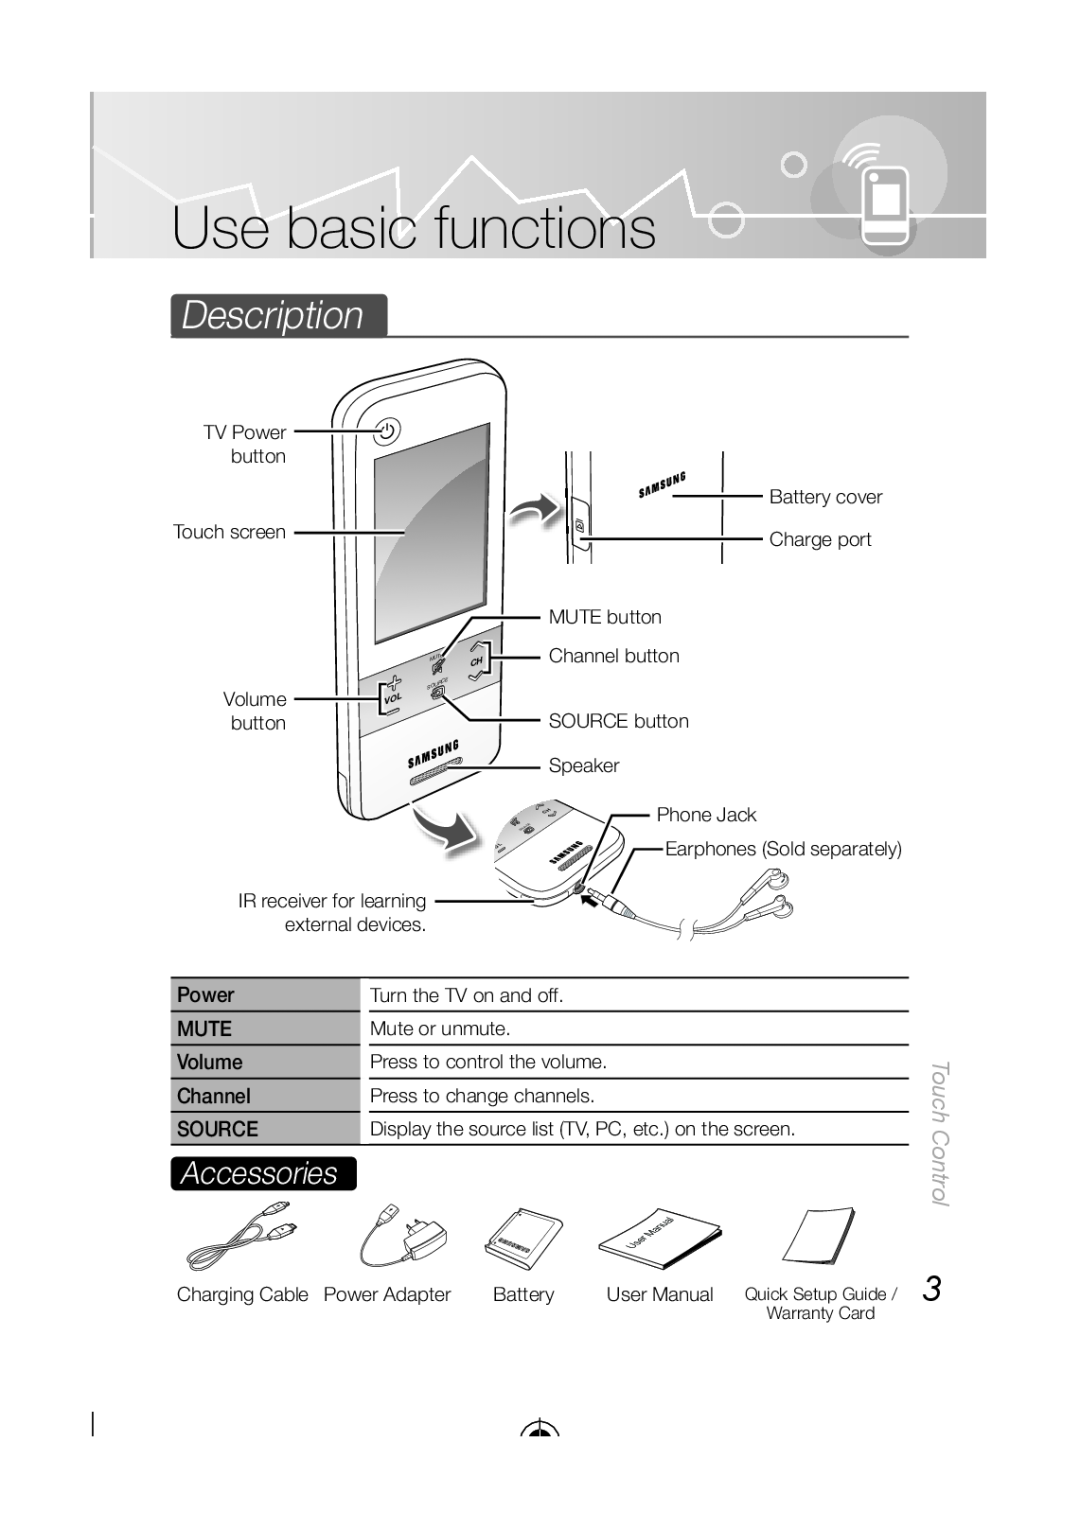 Samsung LED-C9000, BN68-03092A-02 user manual Use basic functions, Description, Accessories, Touch Control 